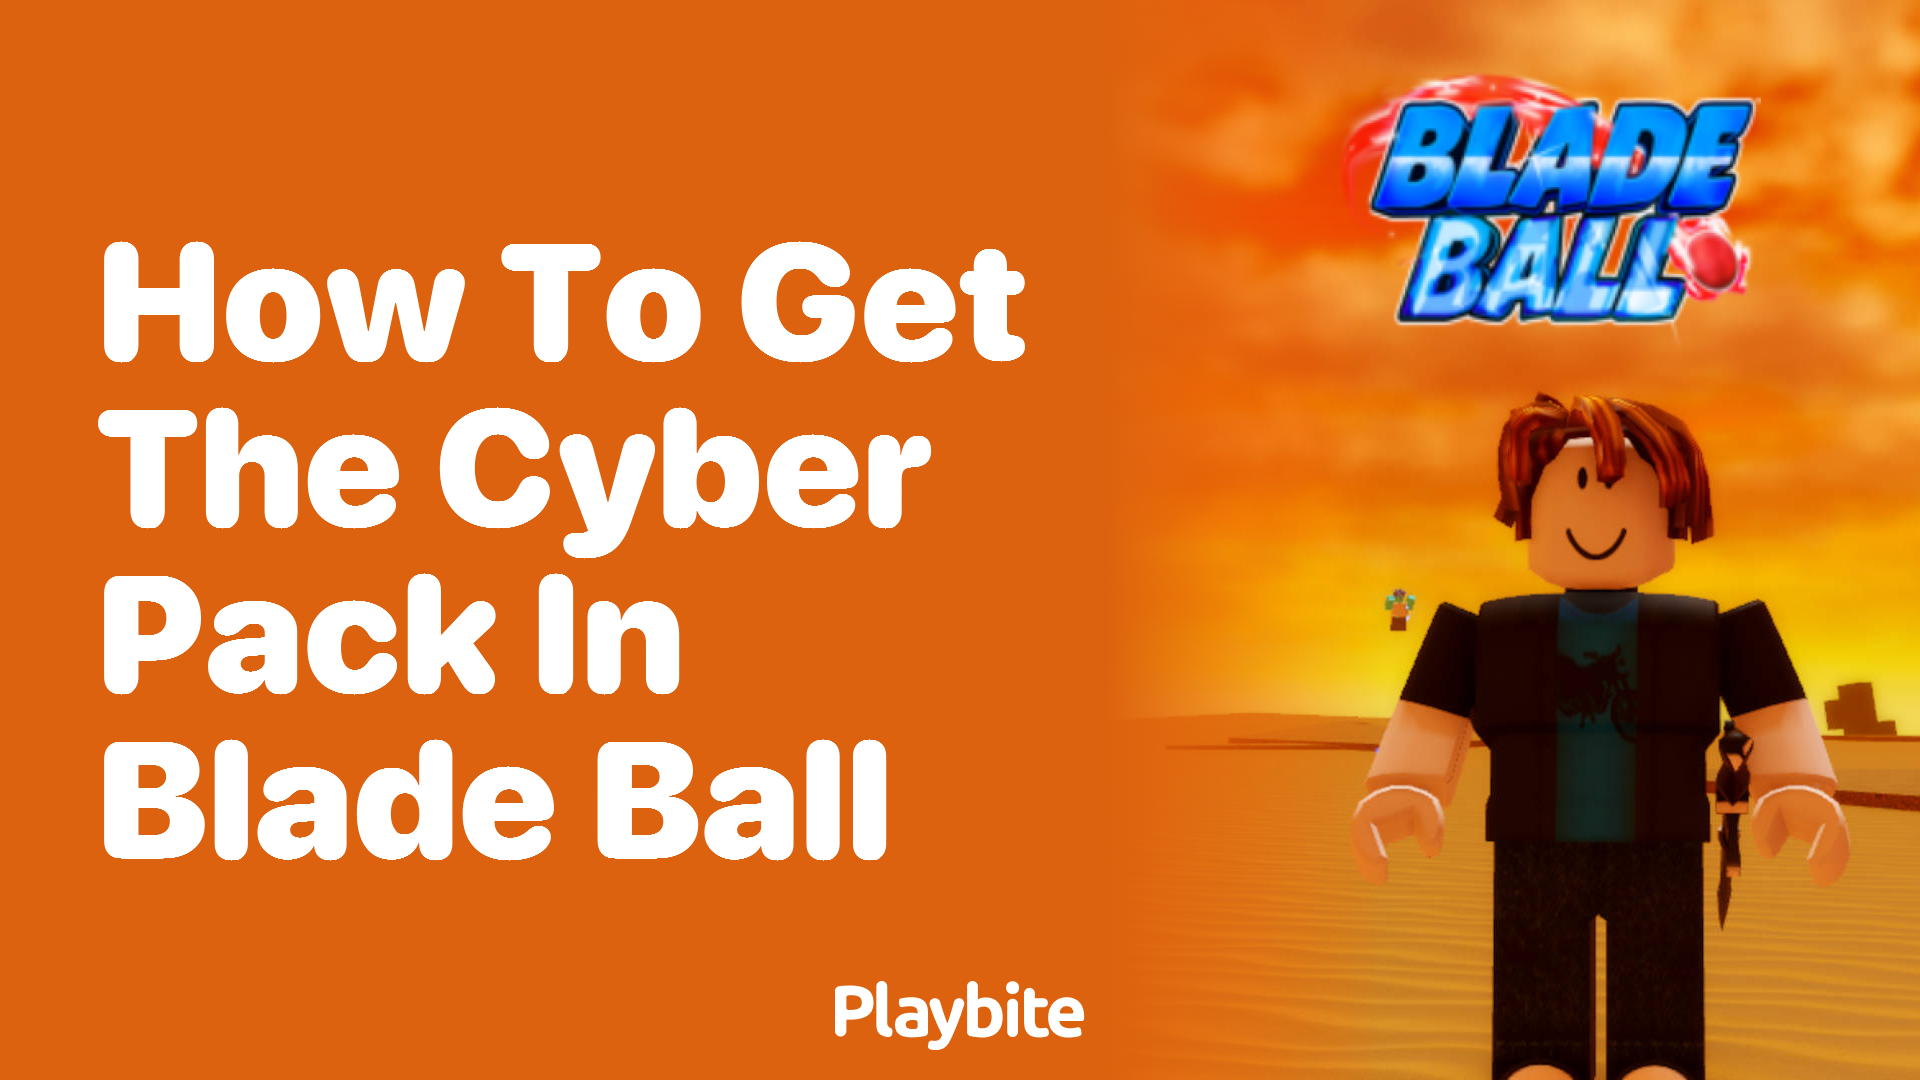 How to Get the Cyber Pack in Blade Ball